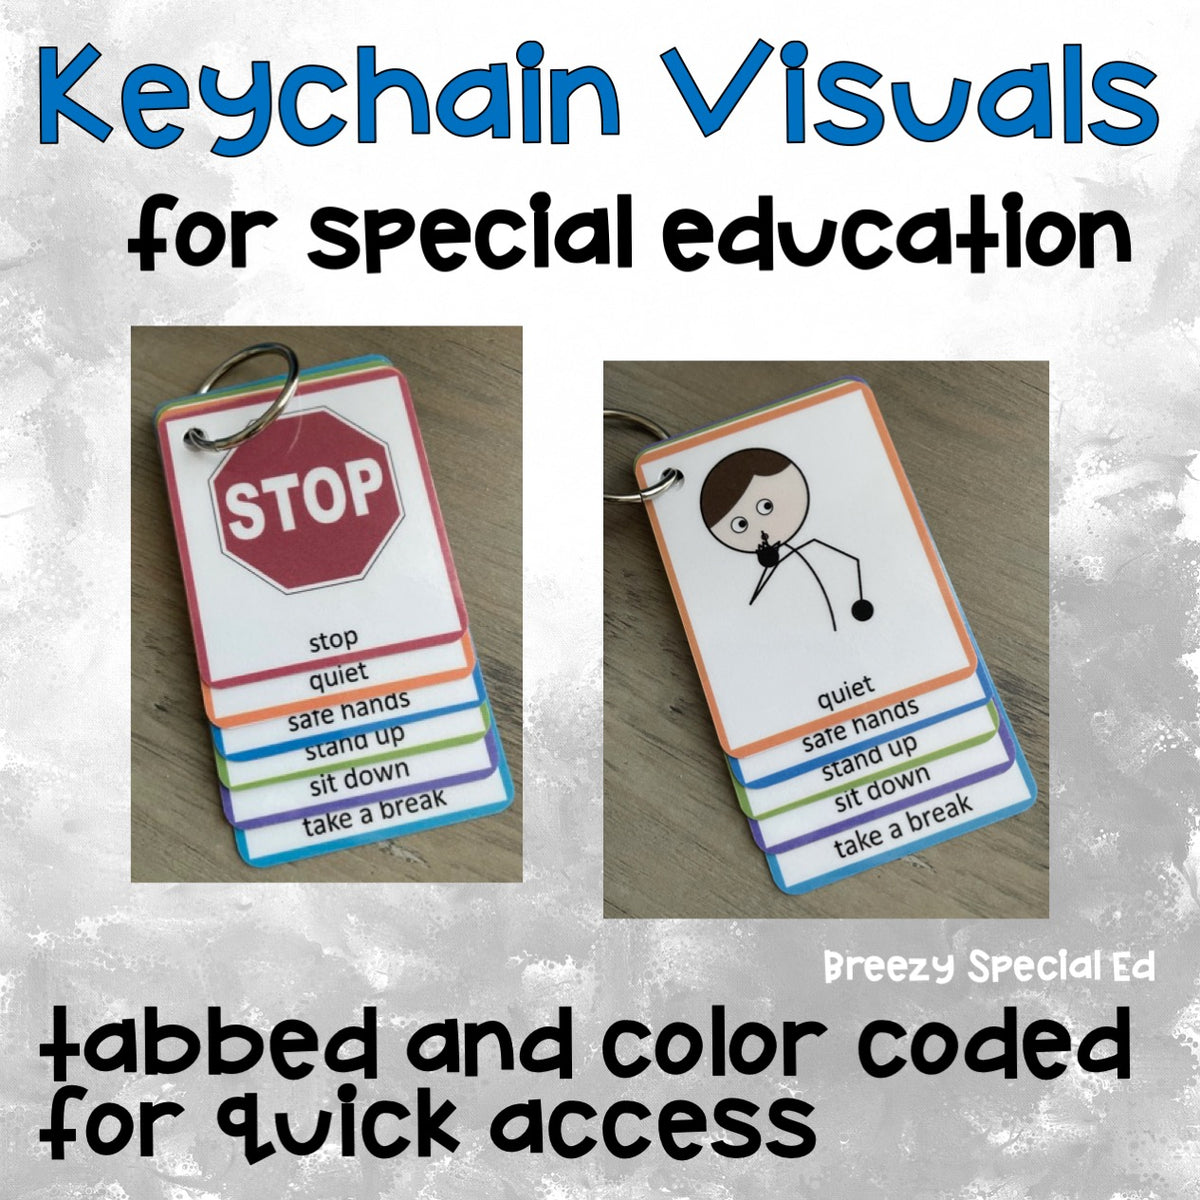 Check out our new lanyard visuals. Visuals are incredibly important as they  support the processing of information and provide a visual cu